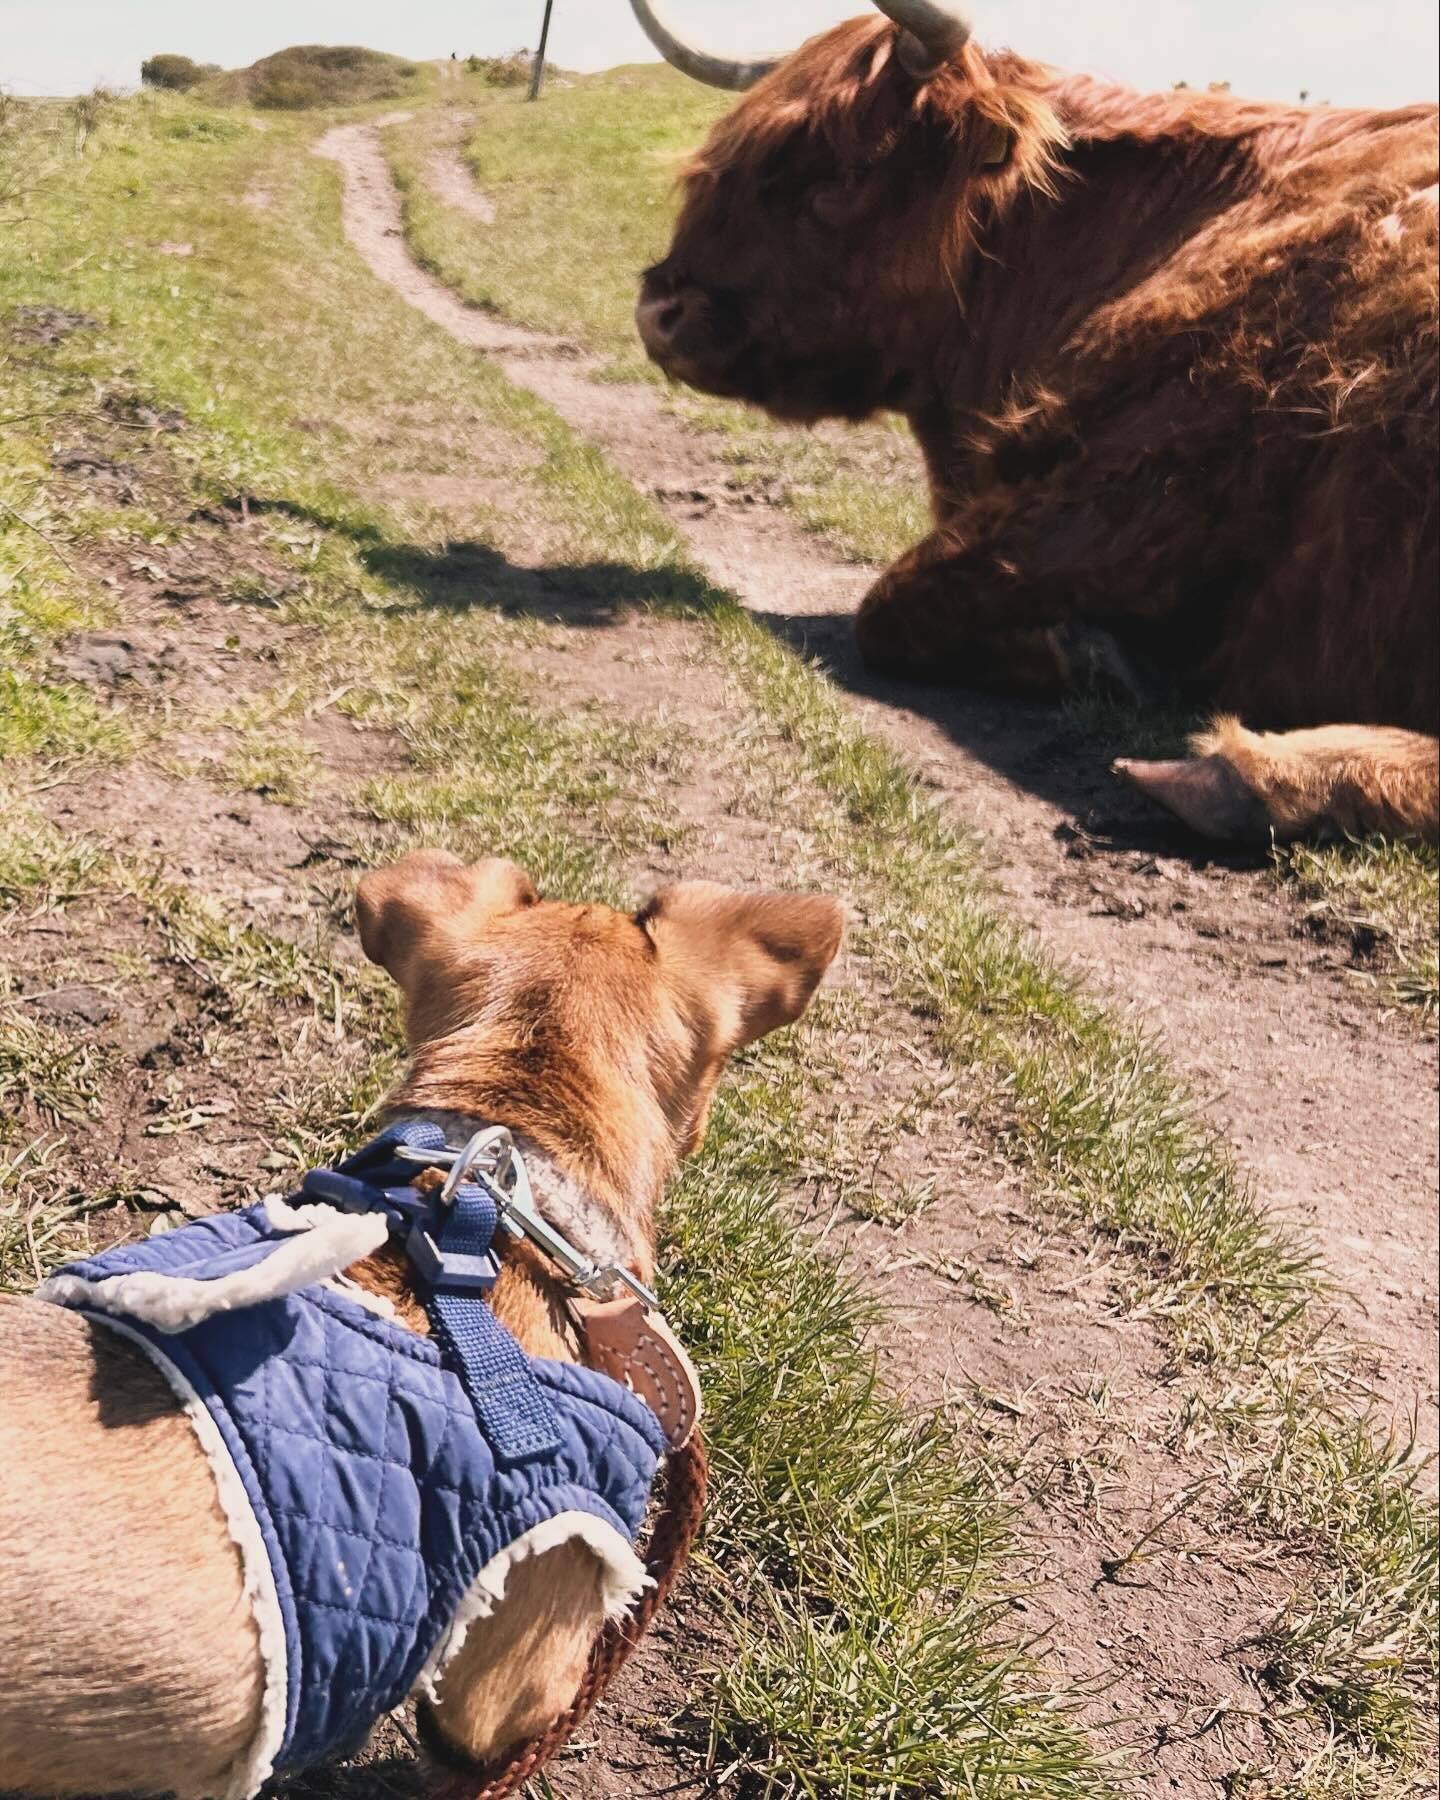 Little and Large. Possibly the most laid back cattle you&rsquo;ll ever meet on the Bolberry / Soar coastal path.

#bolberry #soarmillcove #highlandcattle #devon #dog